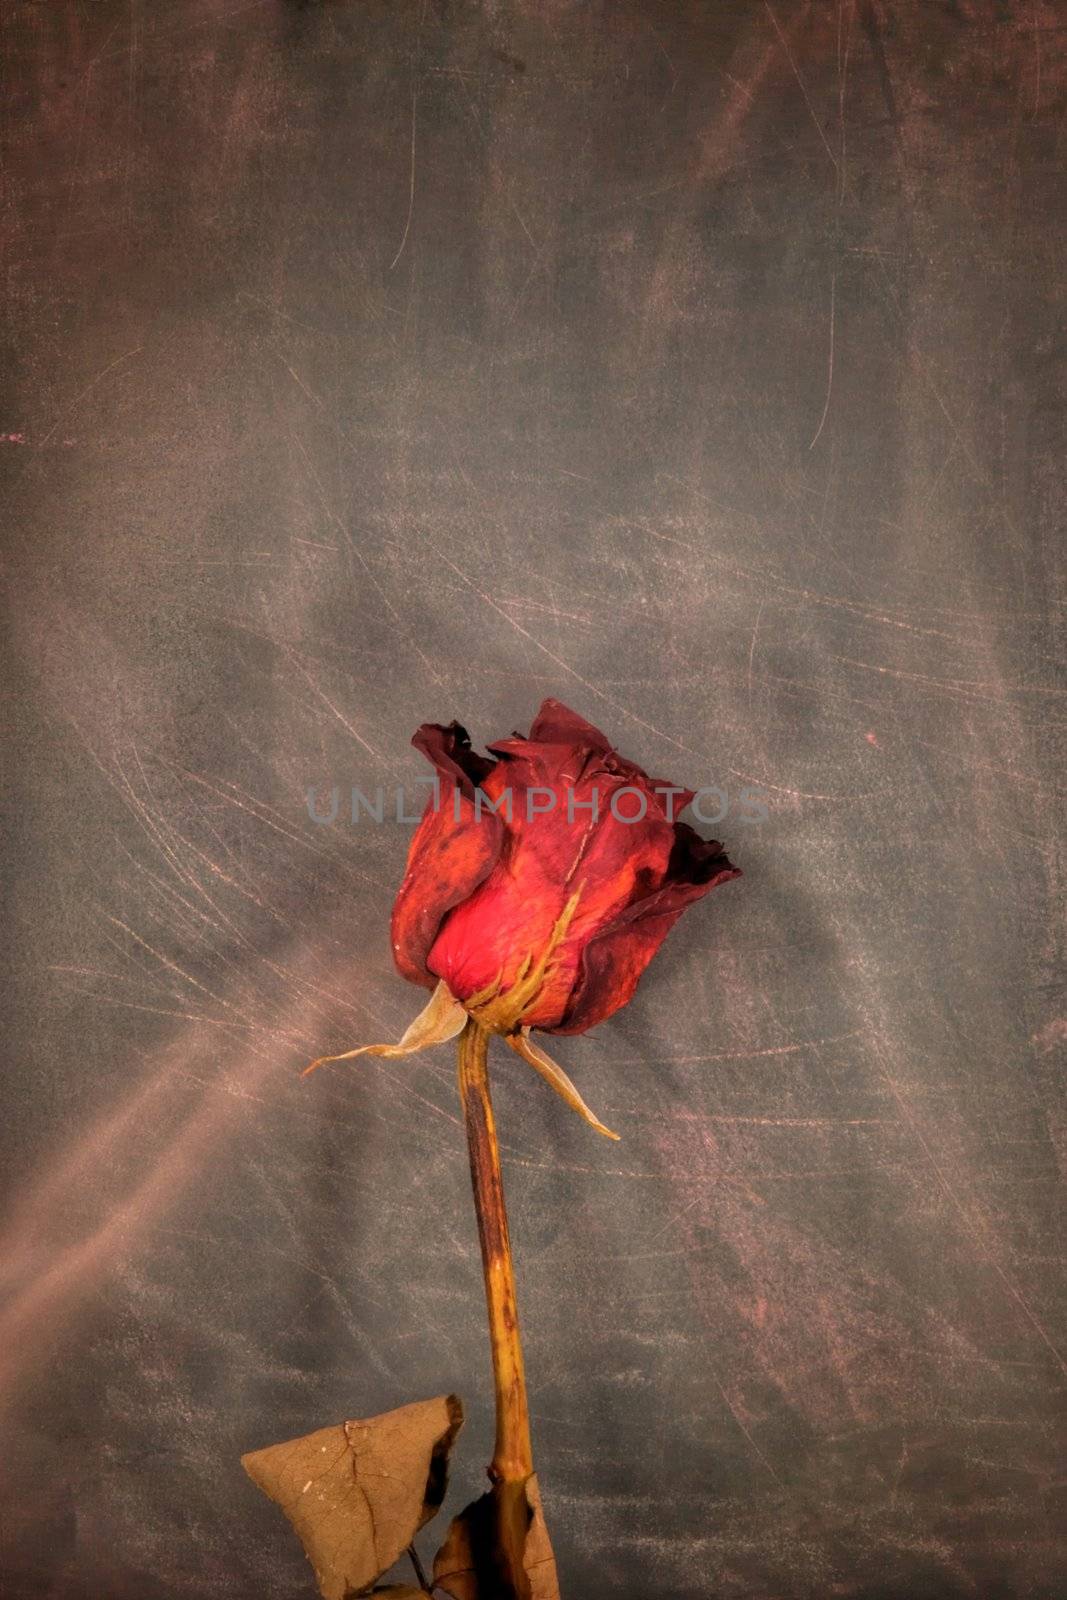 An image of dirty background and old rose